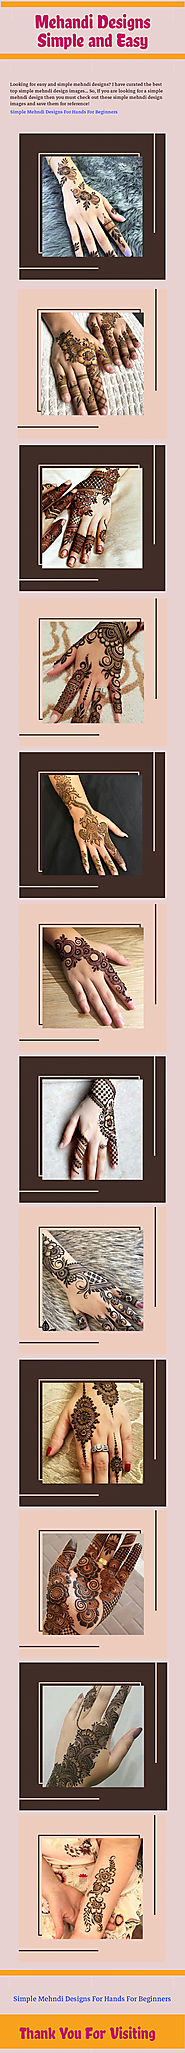 Mehandi Designs Simple and Easy | Infographic